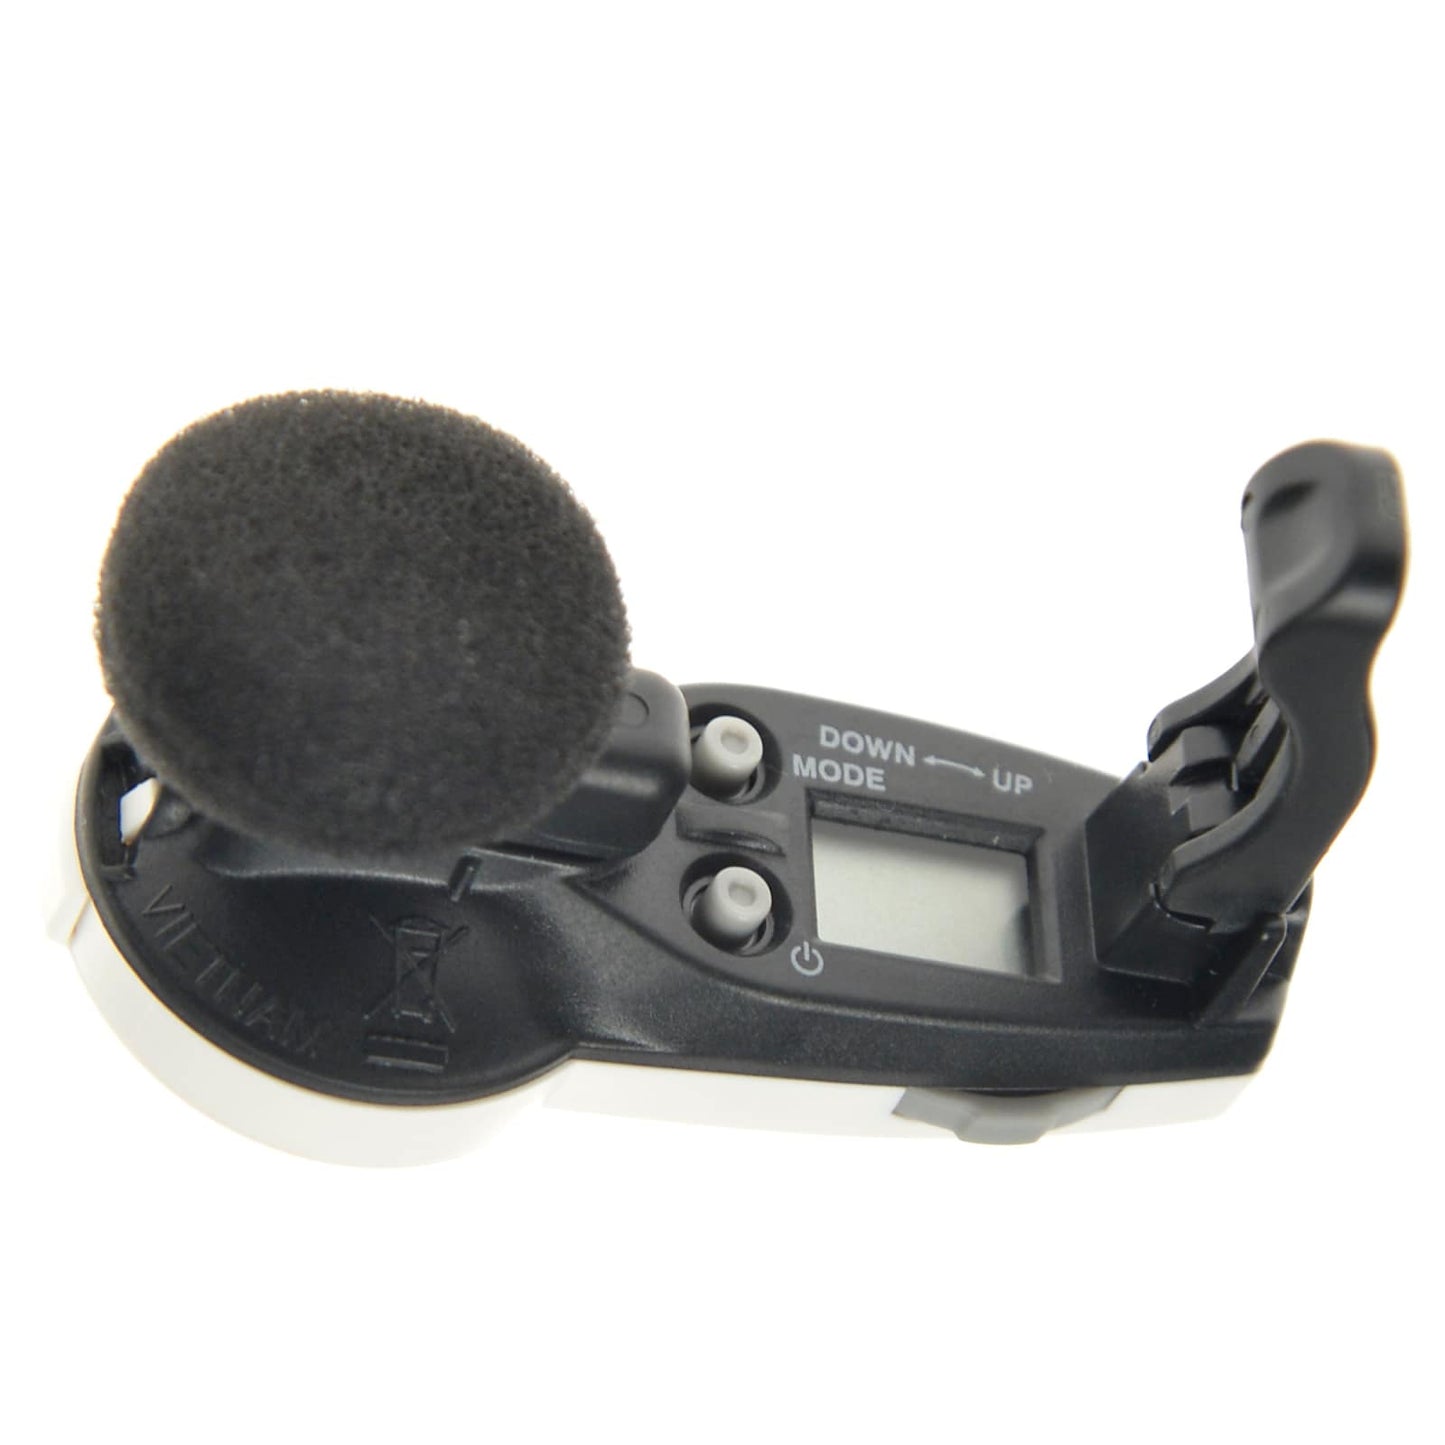 Korg IE1M In-Ear Metronome Accessories / Metronome